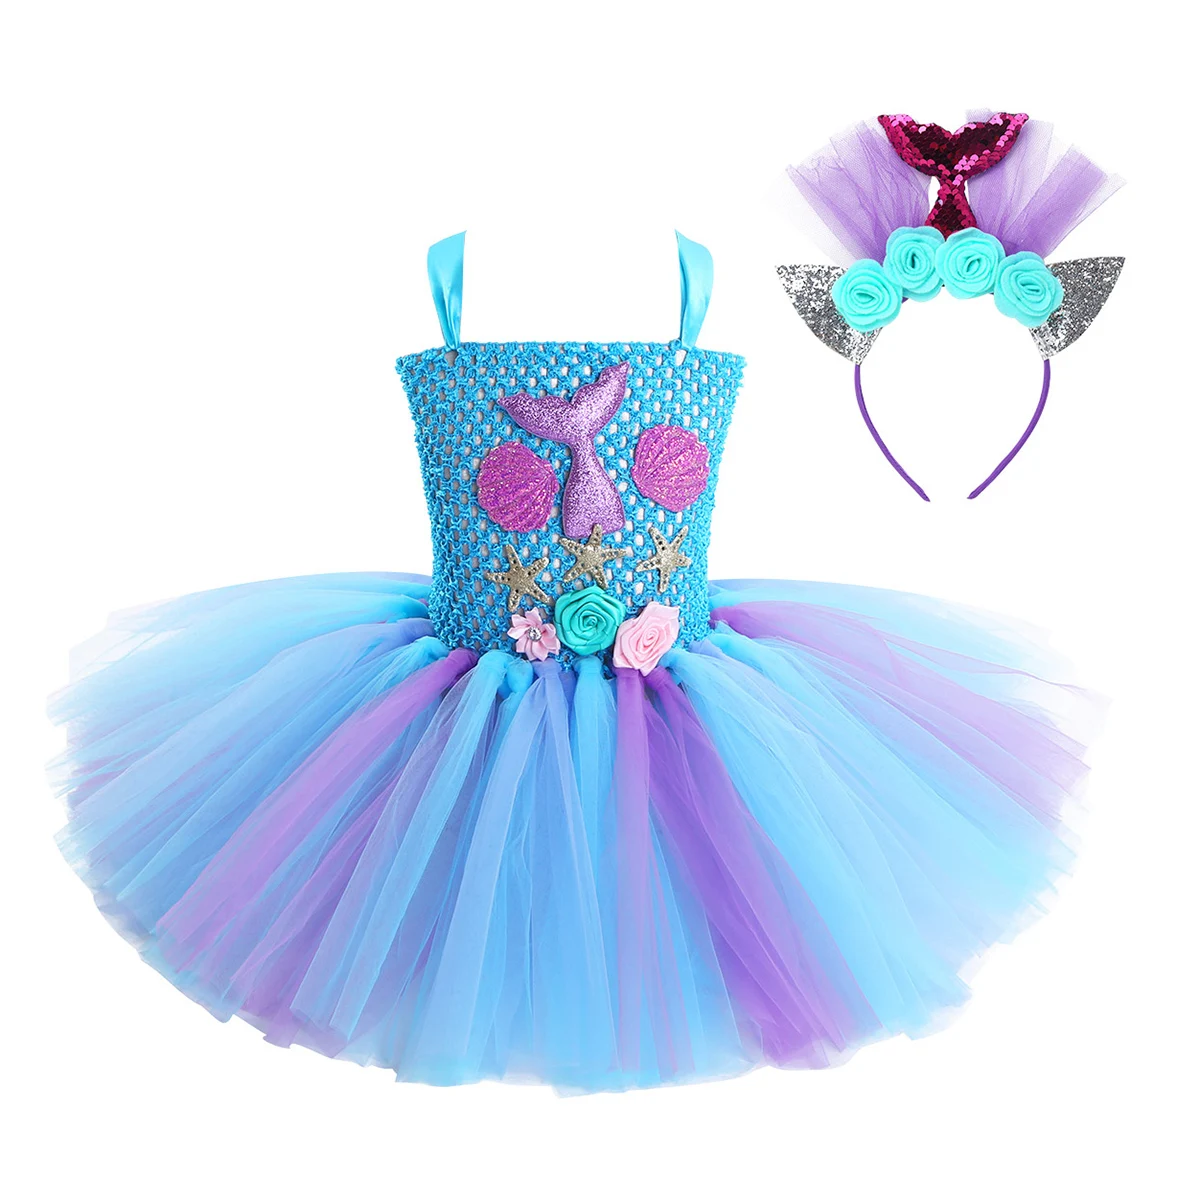 

Kids Girls Mermaid Cosplay Costumes Outfit Mermaid Tail Scallop and Starfish Applique 3D Flower Mesh Tutu Dress with Hair Hoop